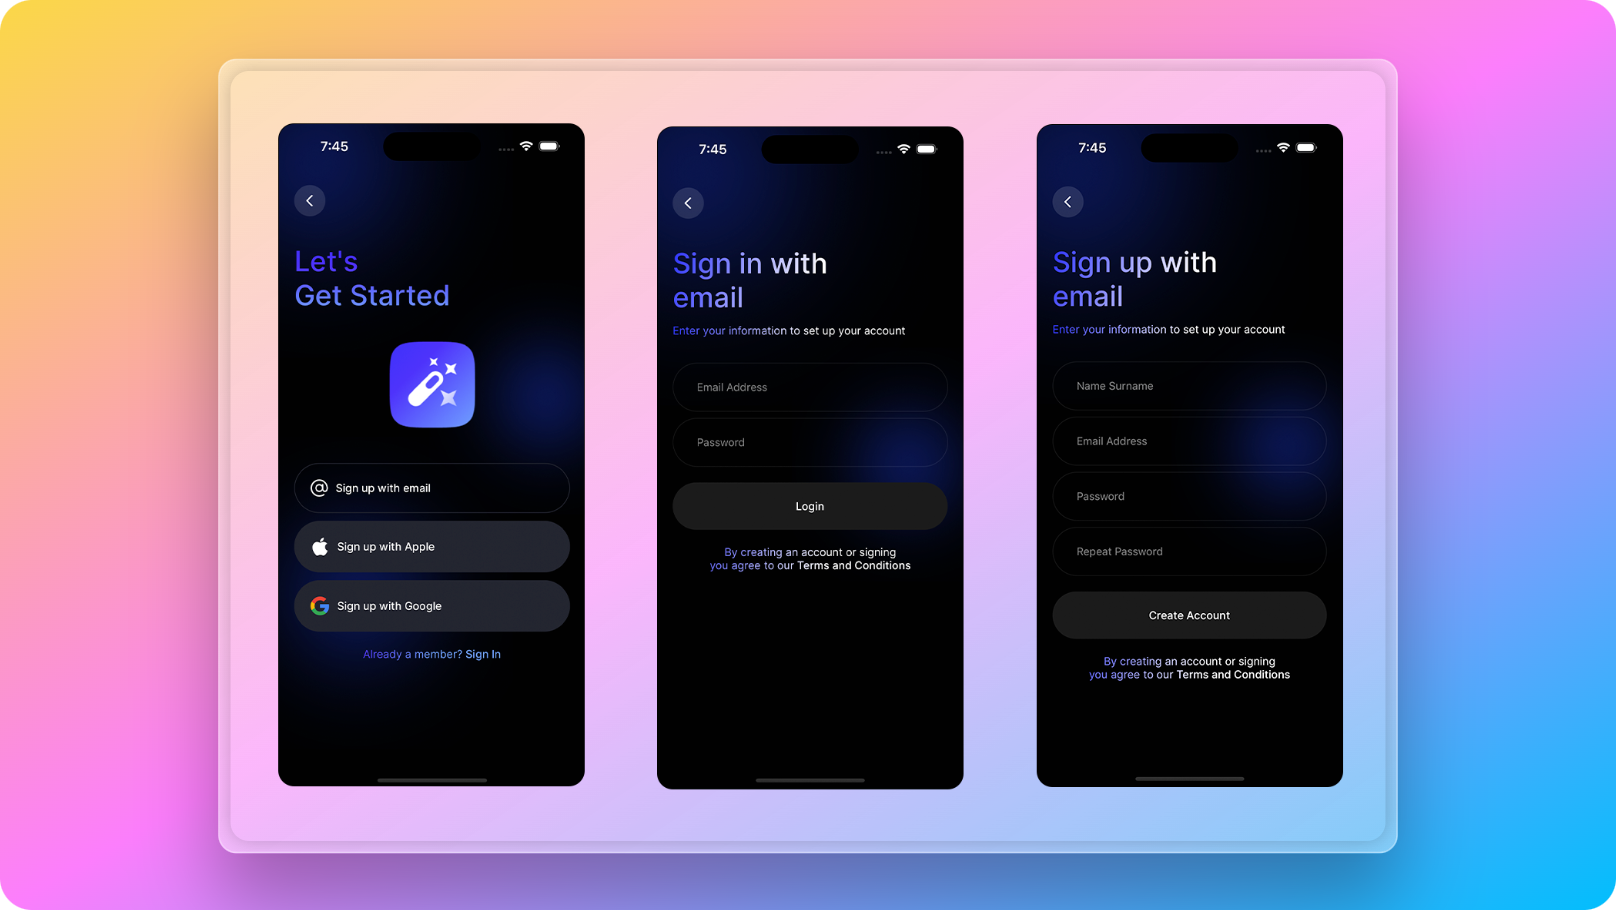 React Native Starter AI email/password authentication screens